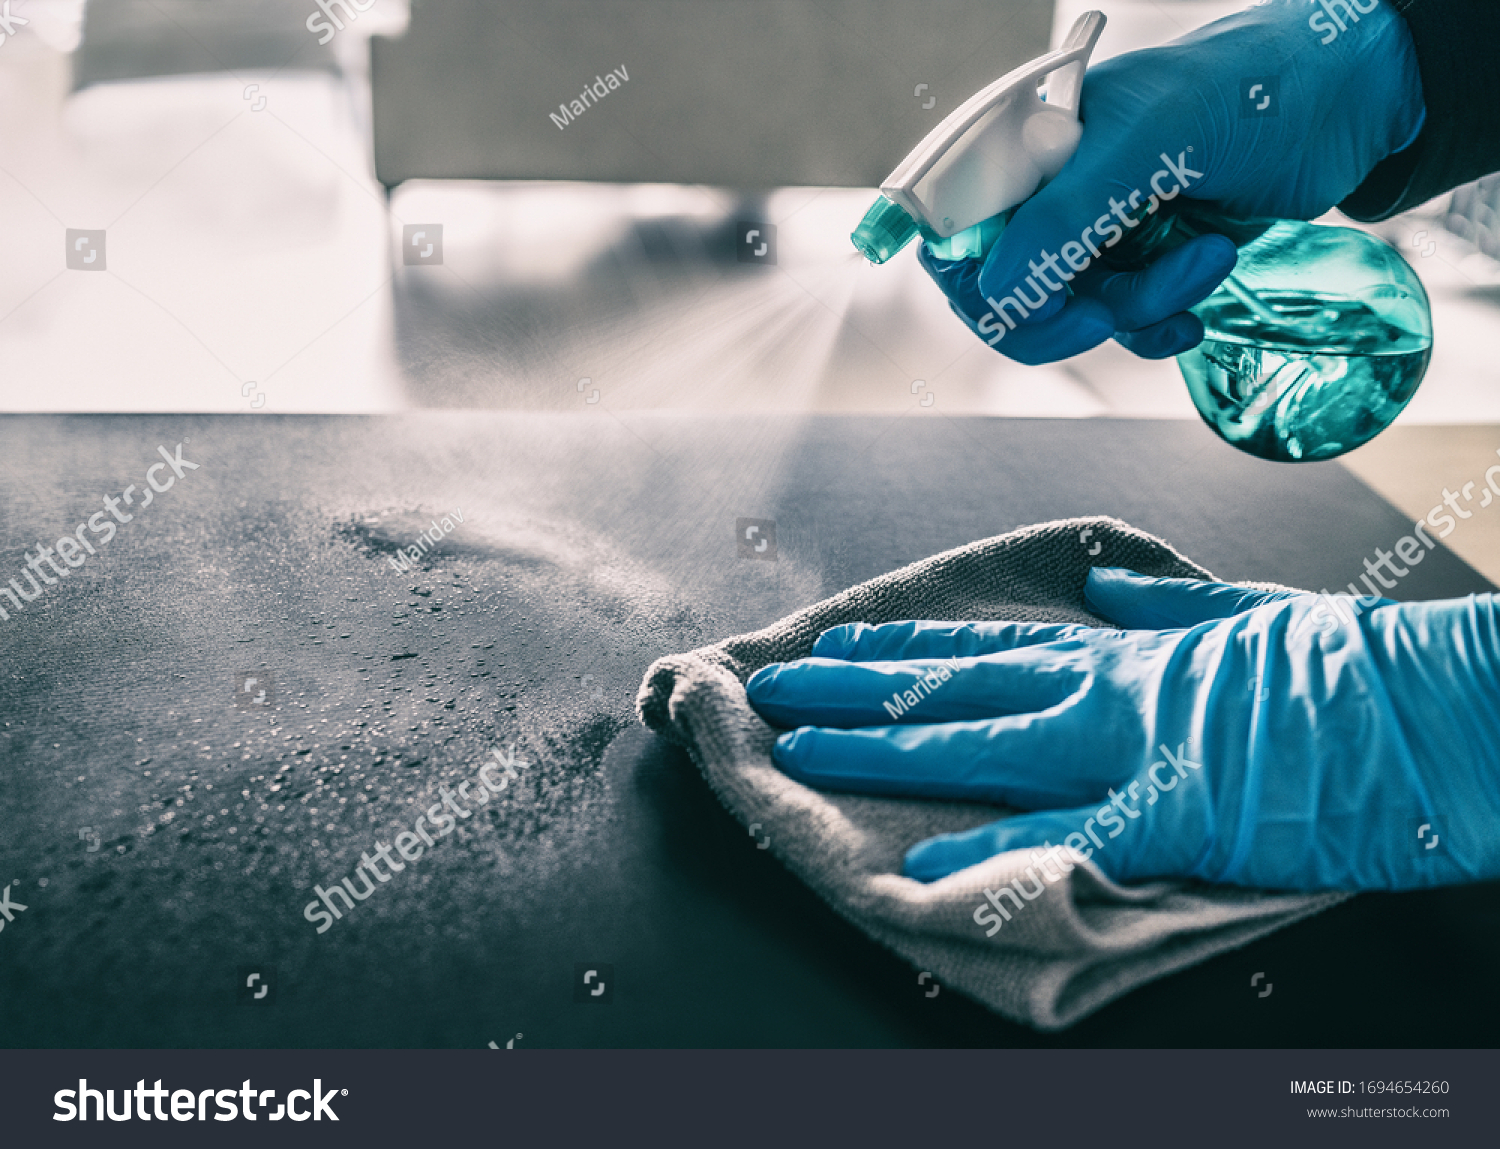 Surface sanitizing against COVID-19 outbreak. Home cleaning spraying antibacterial spray bottle disinfecting against coronavirus wearing nitrile gloves. Sanitize hospital surfaces prevention. #1694654260